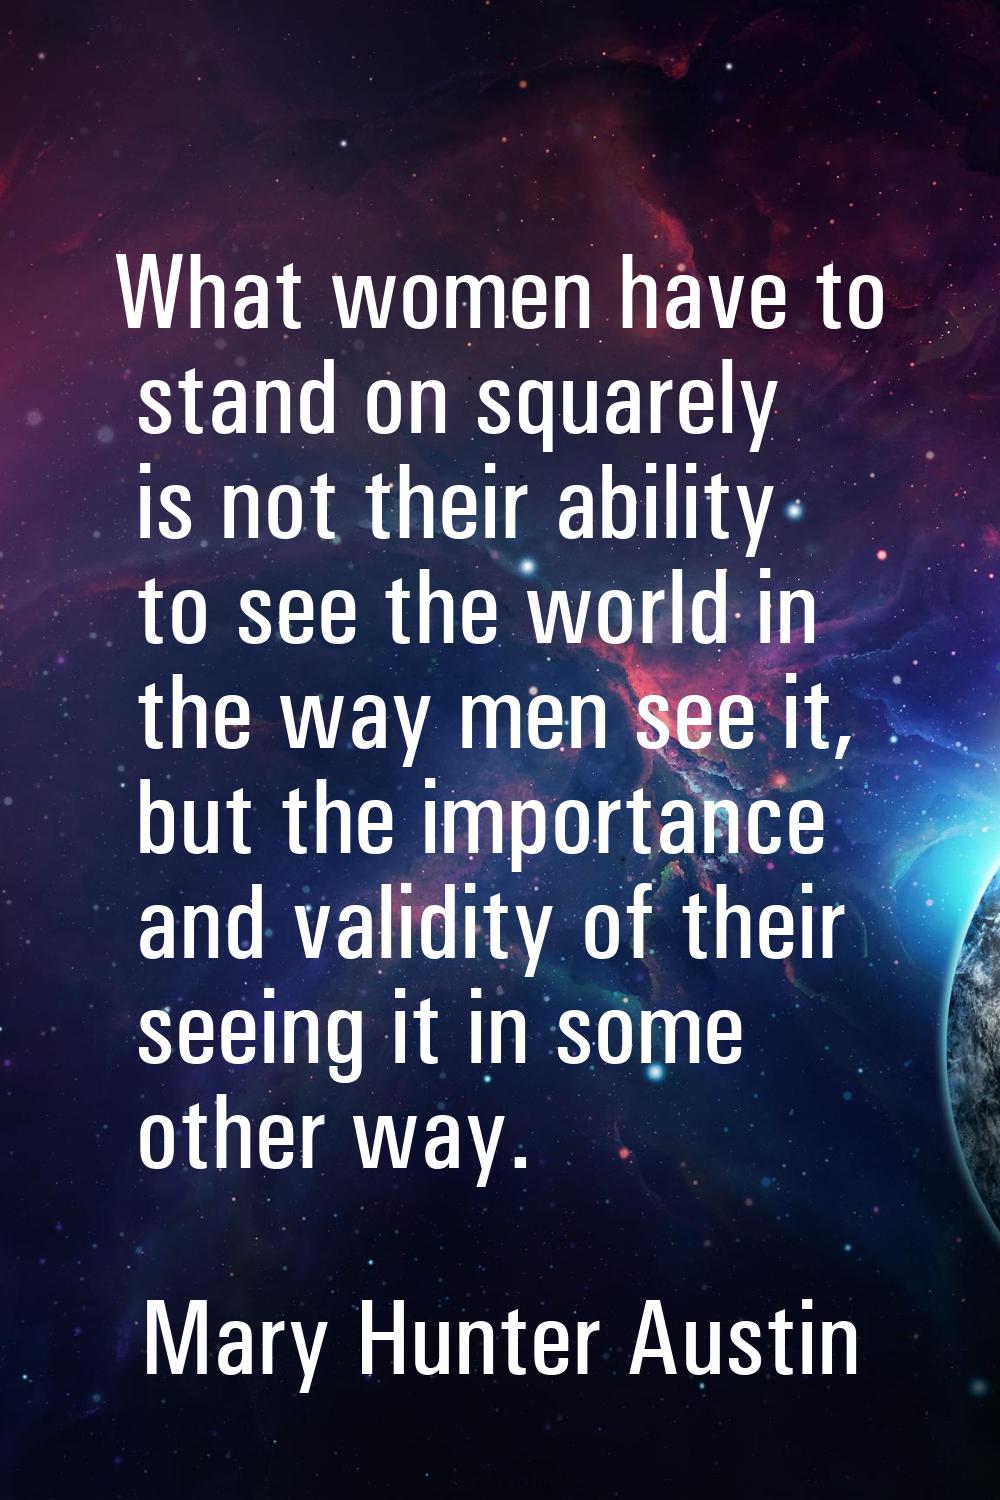 What women have to stand on squarely is not their ability to see the world in the way men see it, b